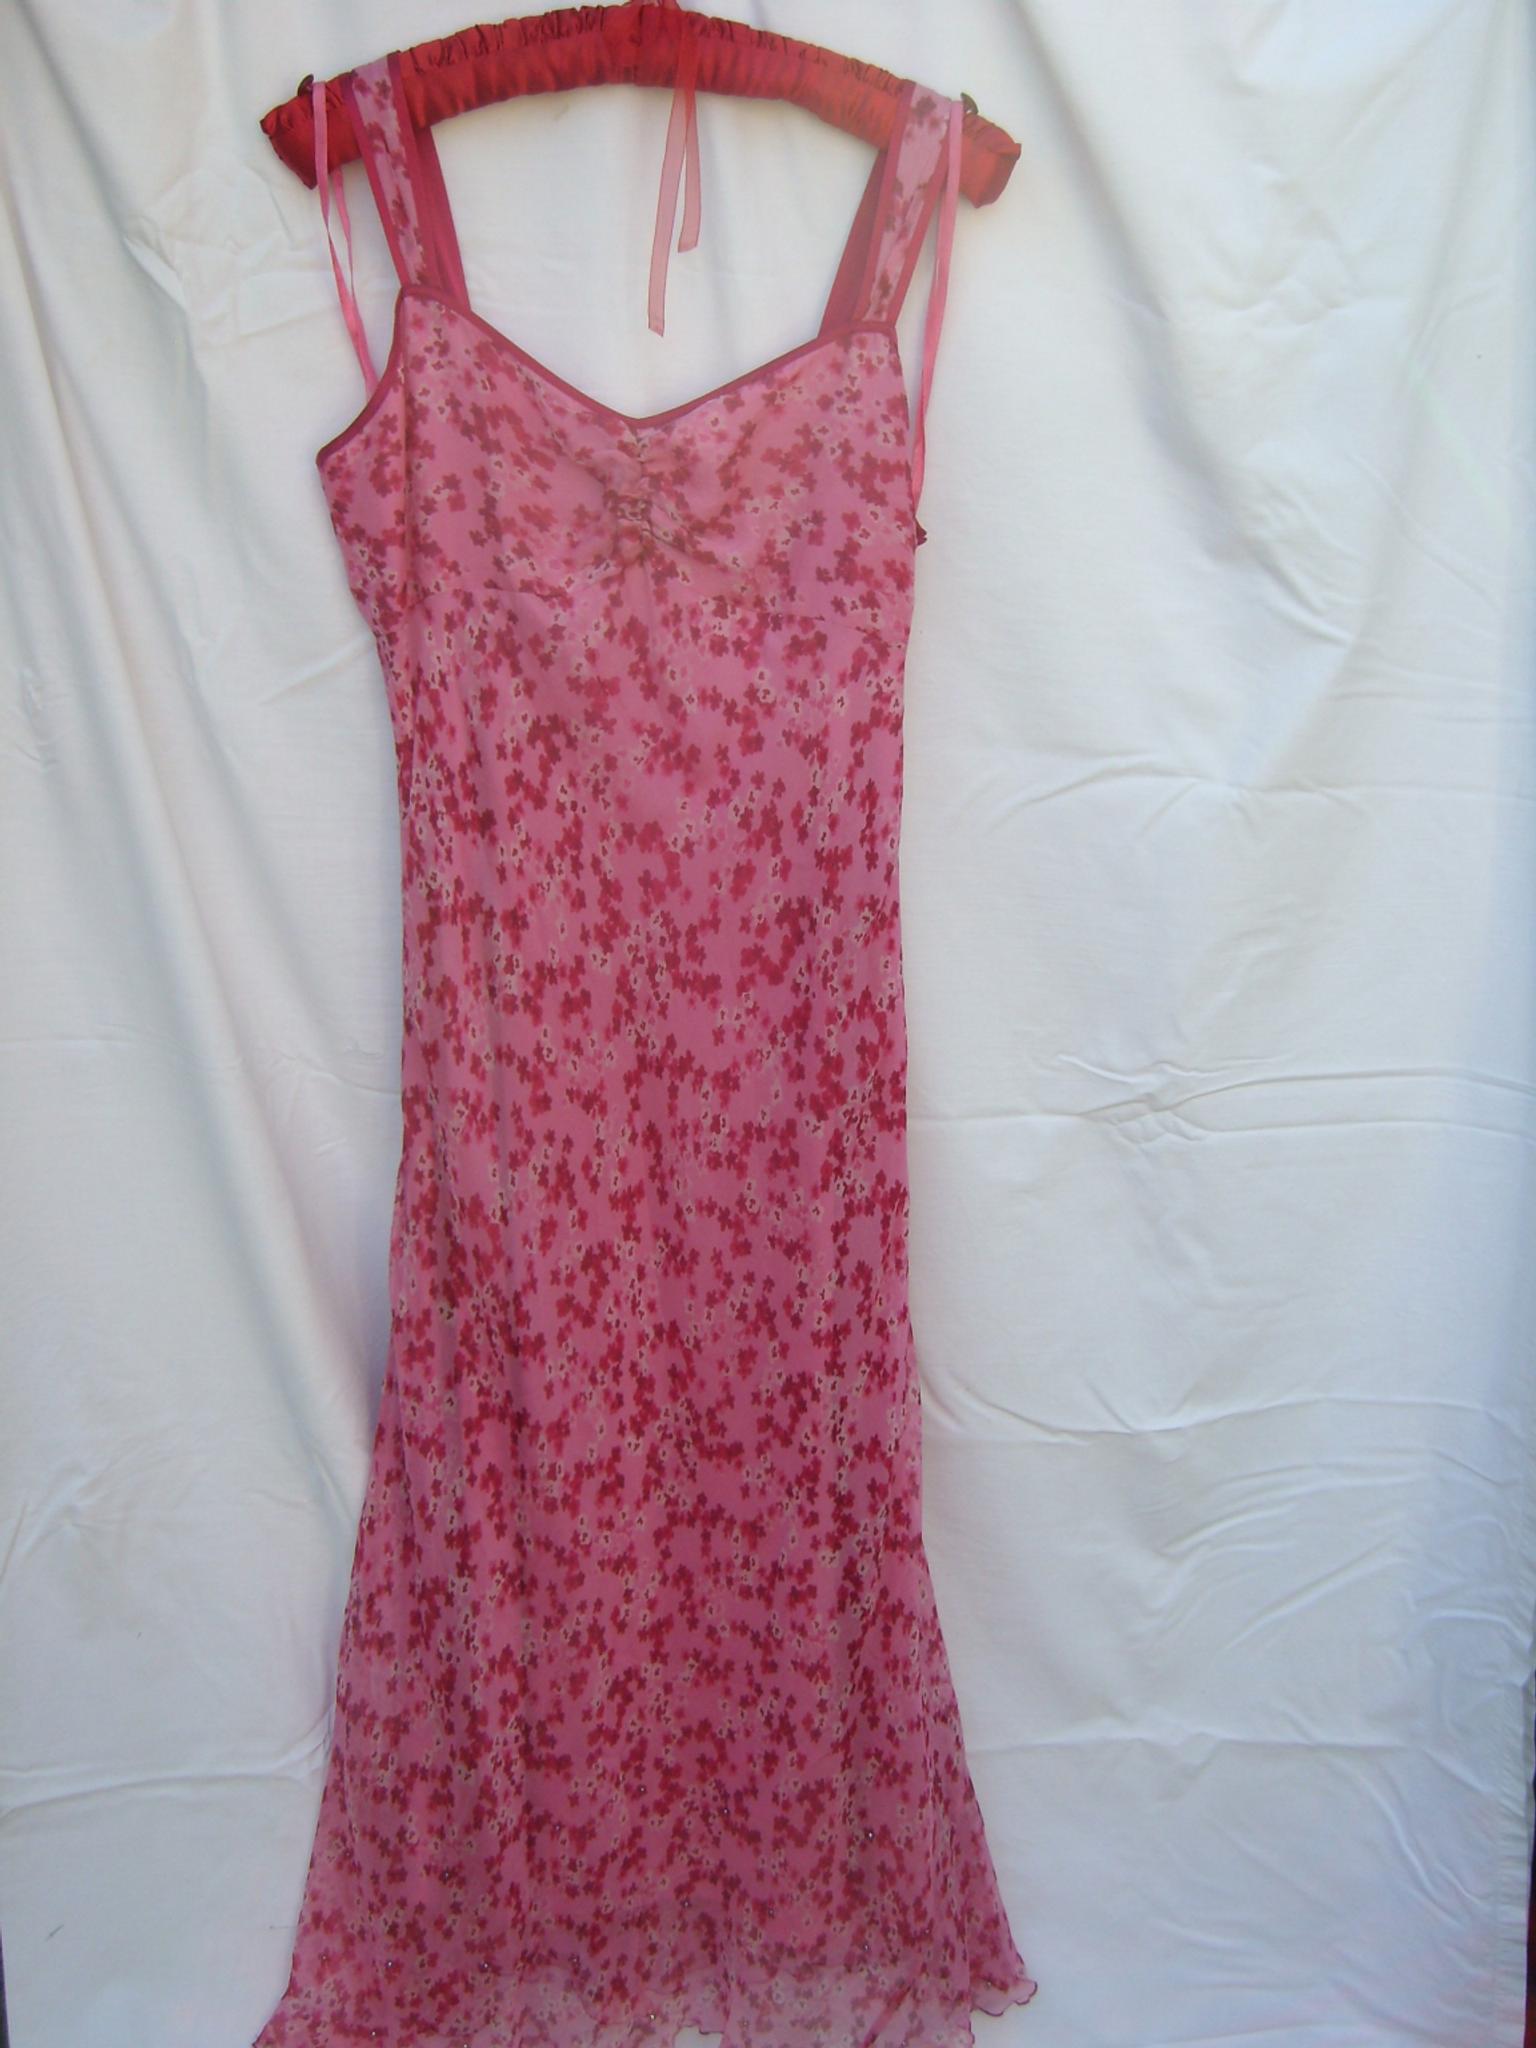 Size 14 COUNTRY CASUALS Pink Silk Dress in SW19 London Borough of Merton  for £27.00 for sale | Shpock